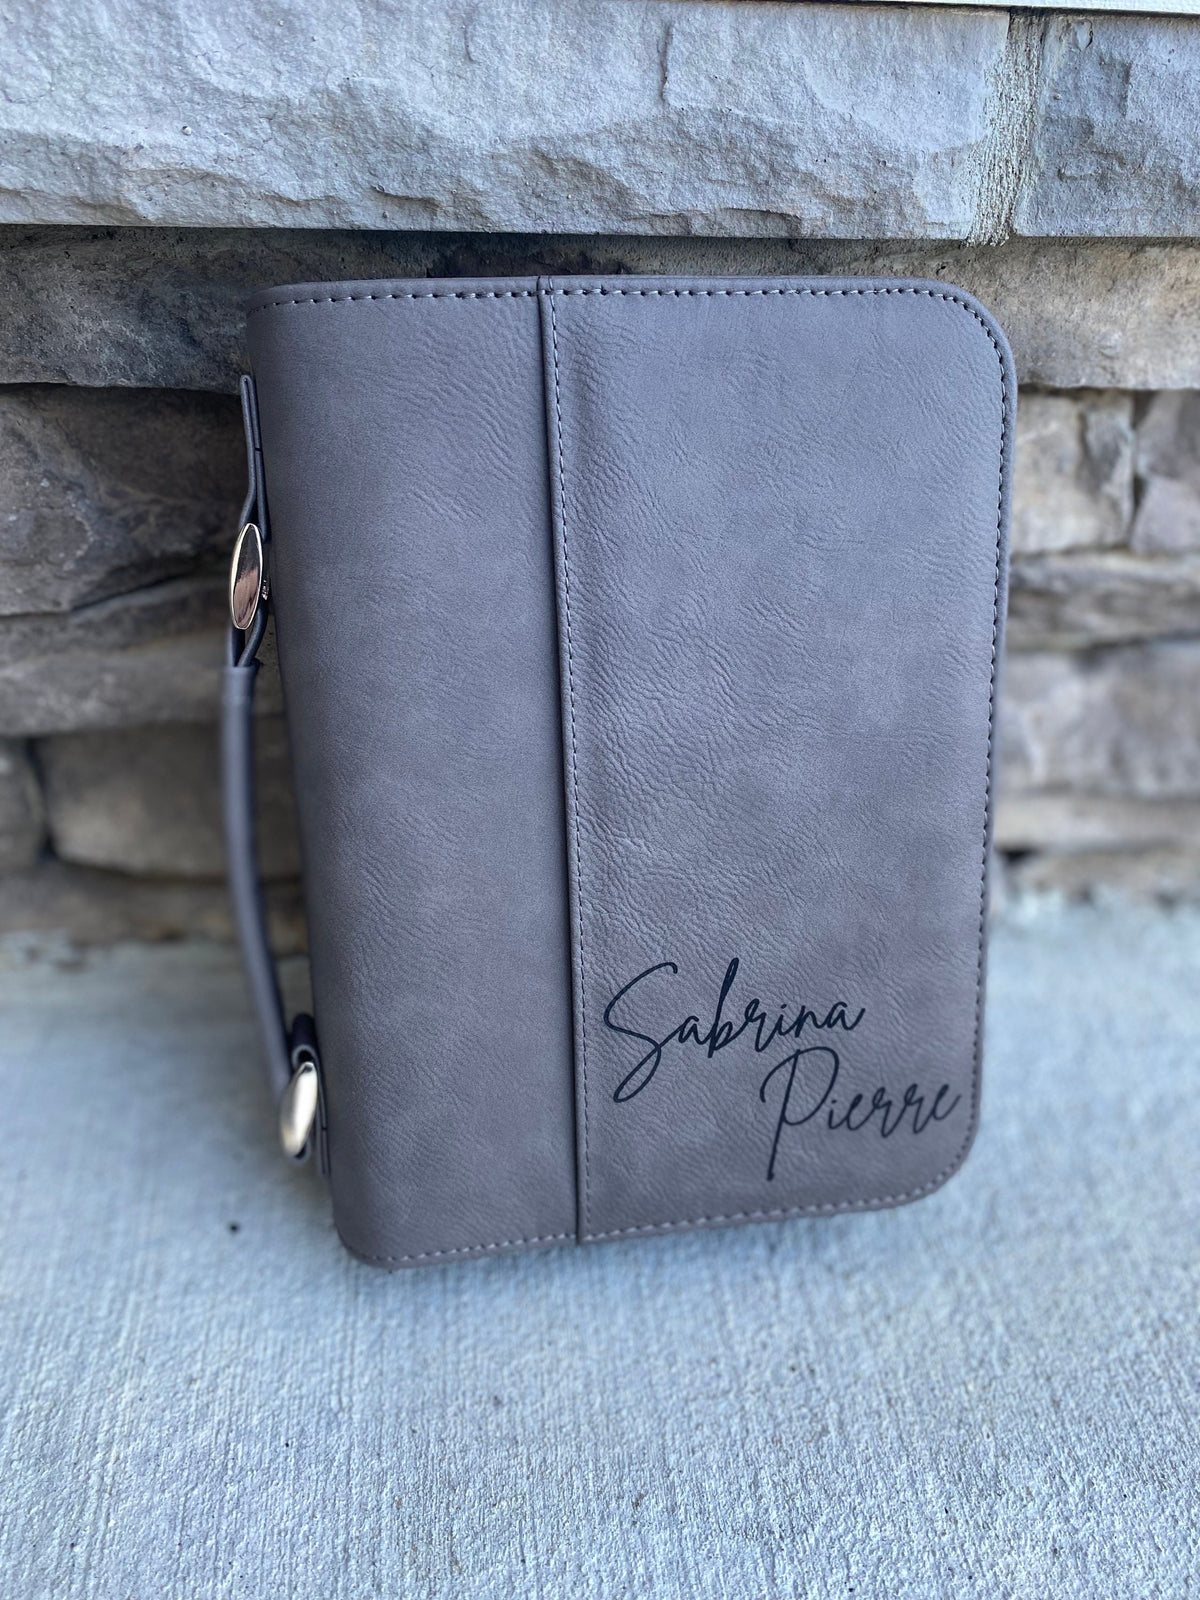 Custom Mother's Day Gift, Personalized Bible Cover, Leather Bible Cover, Mother's Day Gifts, Gifts for Mom, Grandma Gifts, Religious Gifts